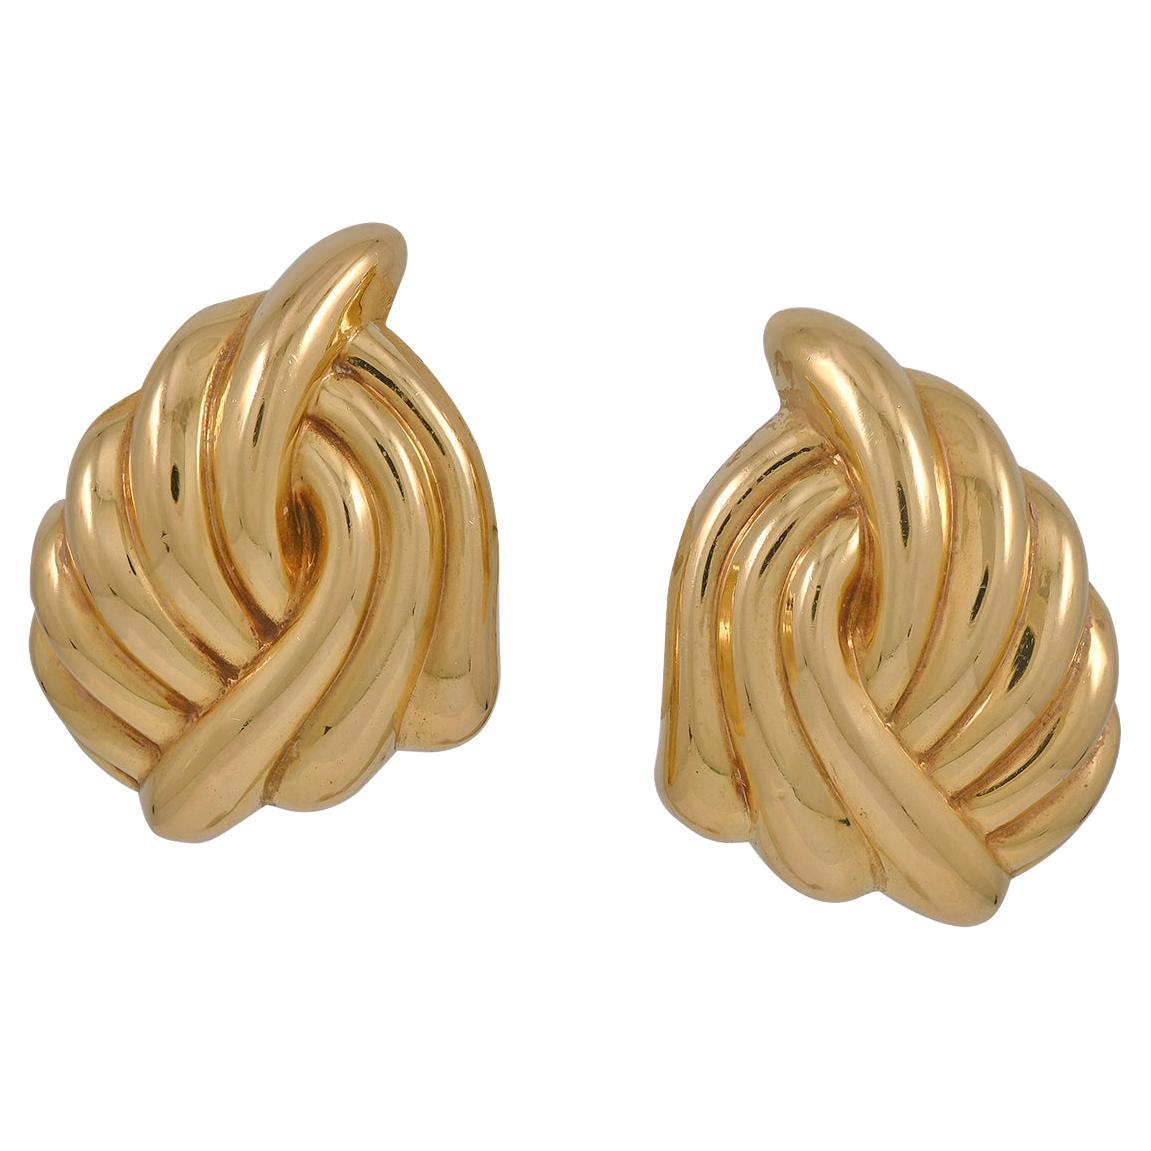 French Fluted Gold Knot Earrings